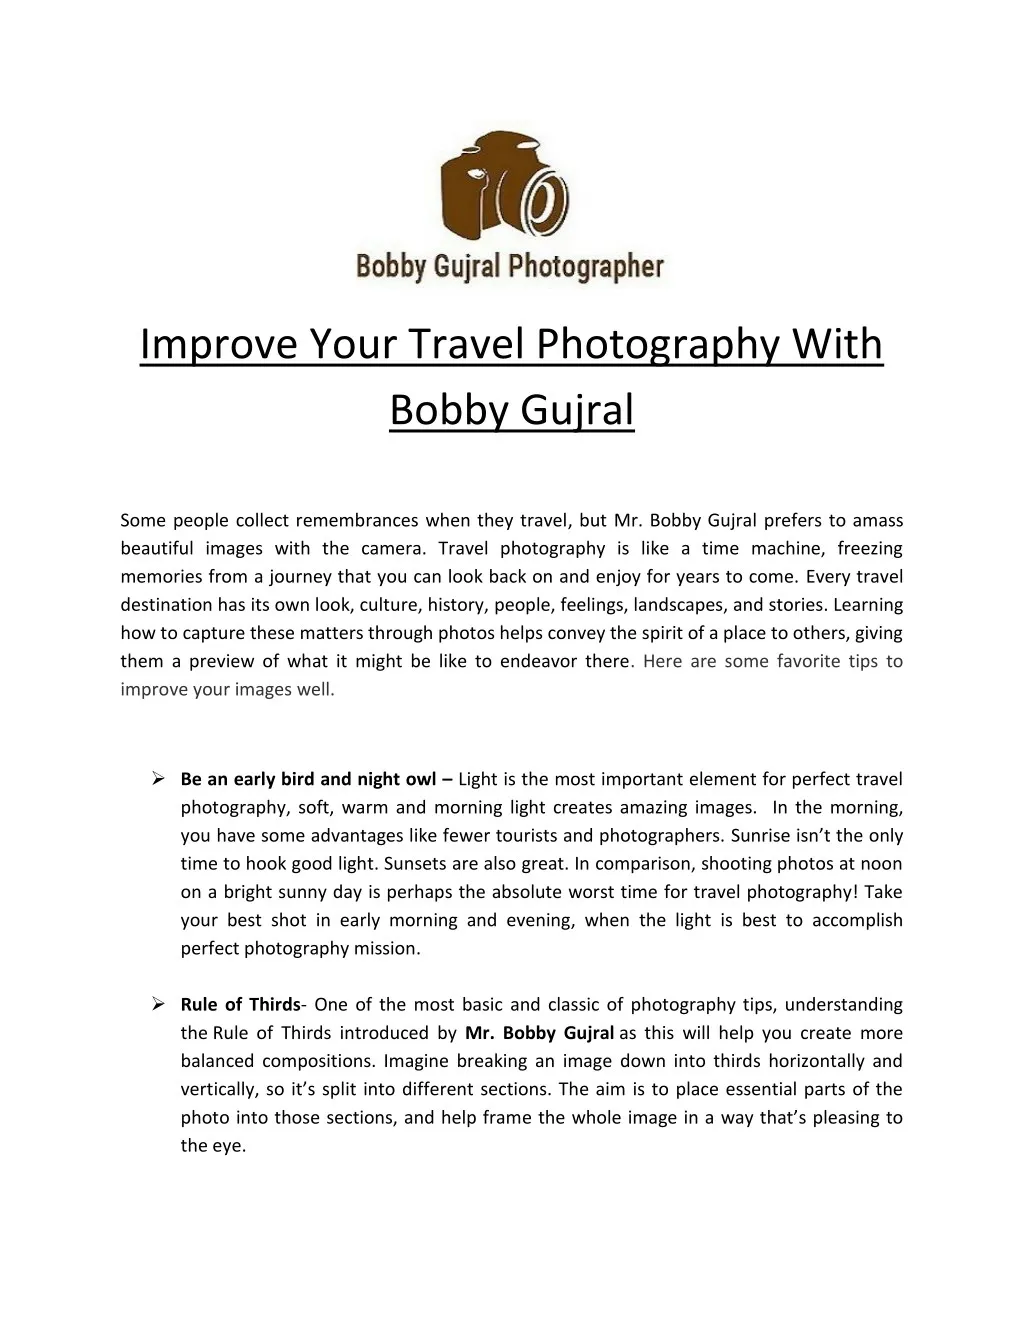 improve your travel photography with bobby gujral